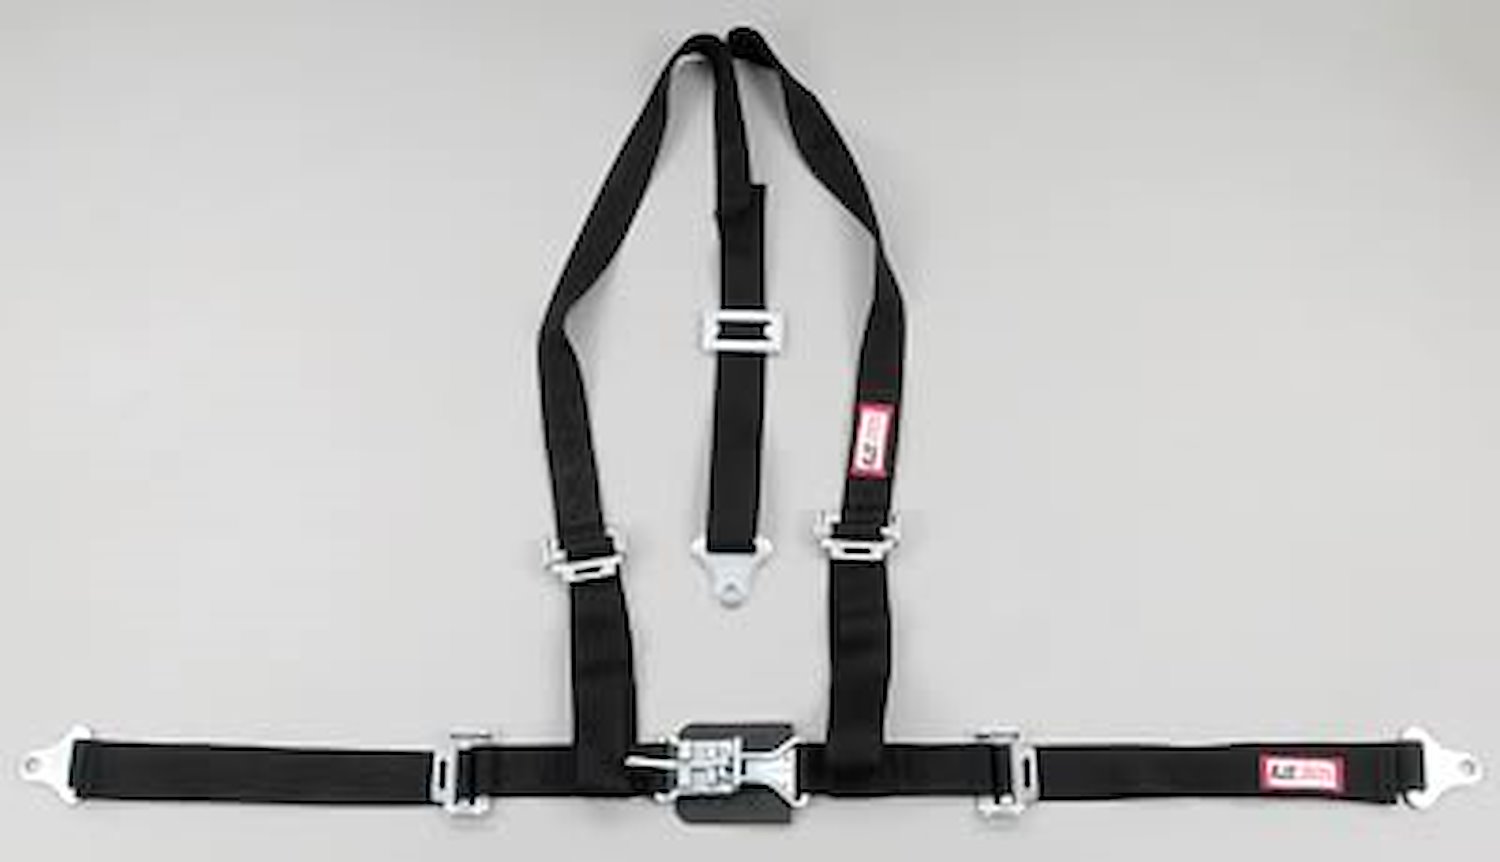 NON-SFI L&L HARNESS 3 PULL DOWN Lap Belt SNAP SEWN IN 2 S.H. Individual FLOOR Mount WRAP/SNAP BLACK